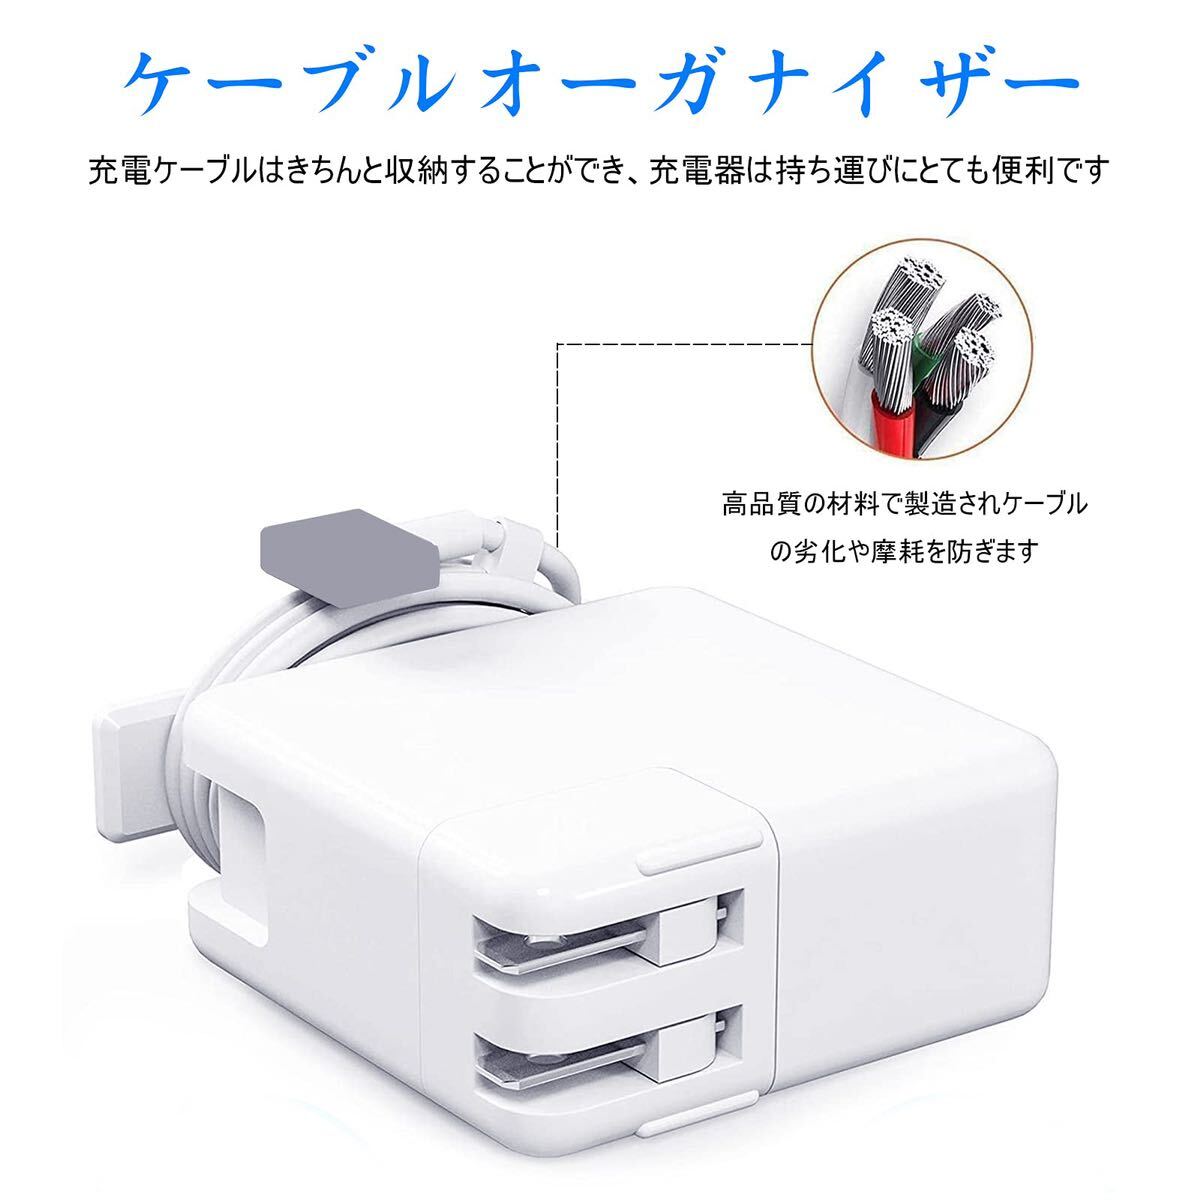 Macbook Air用 充電器 45W Mag 2 T 型 互換 電源アダプタ A1435 / A1436 / A1465 / A1466 T字コネクタ 11インチおよび13インチ(H84)_画像5